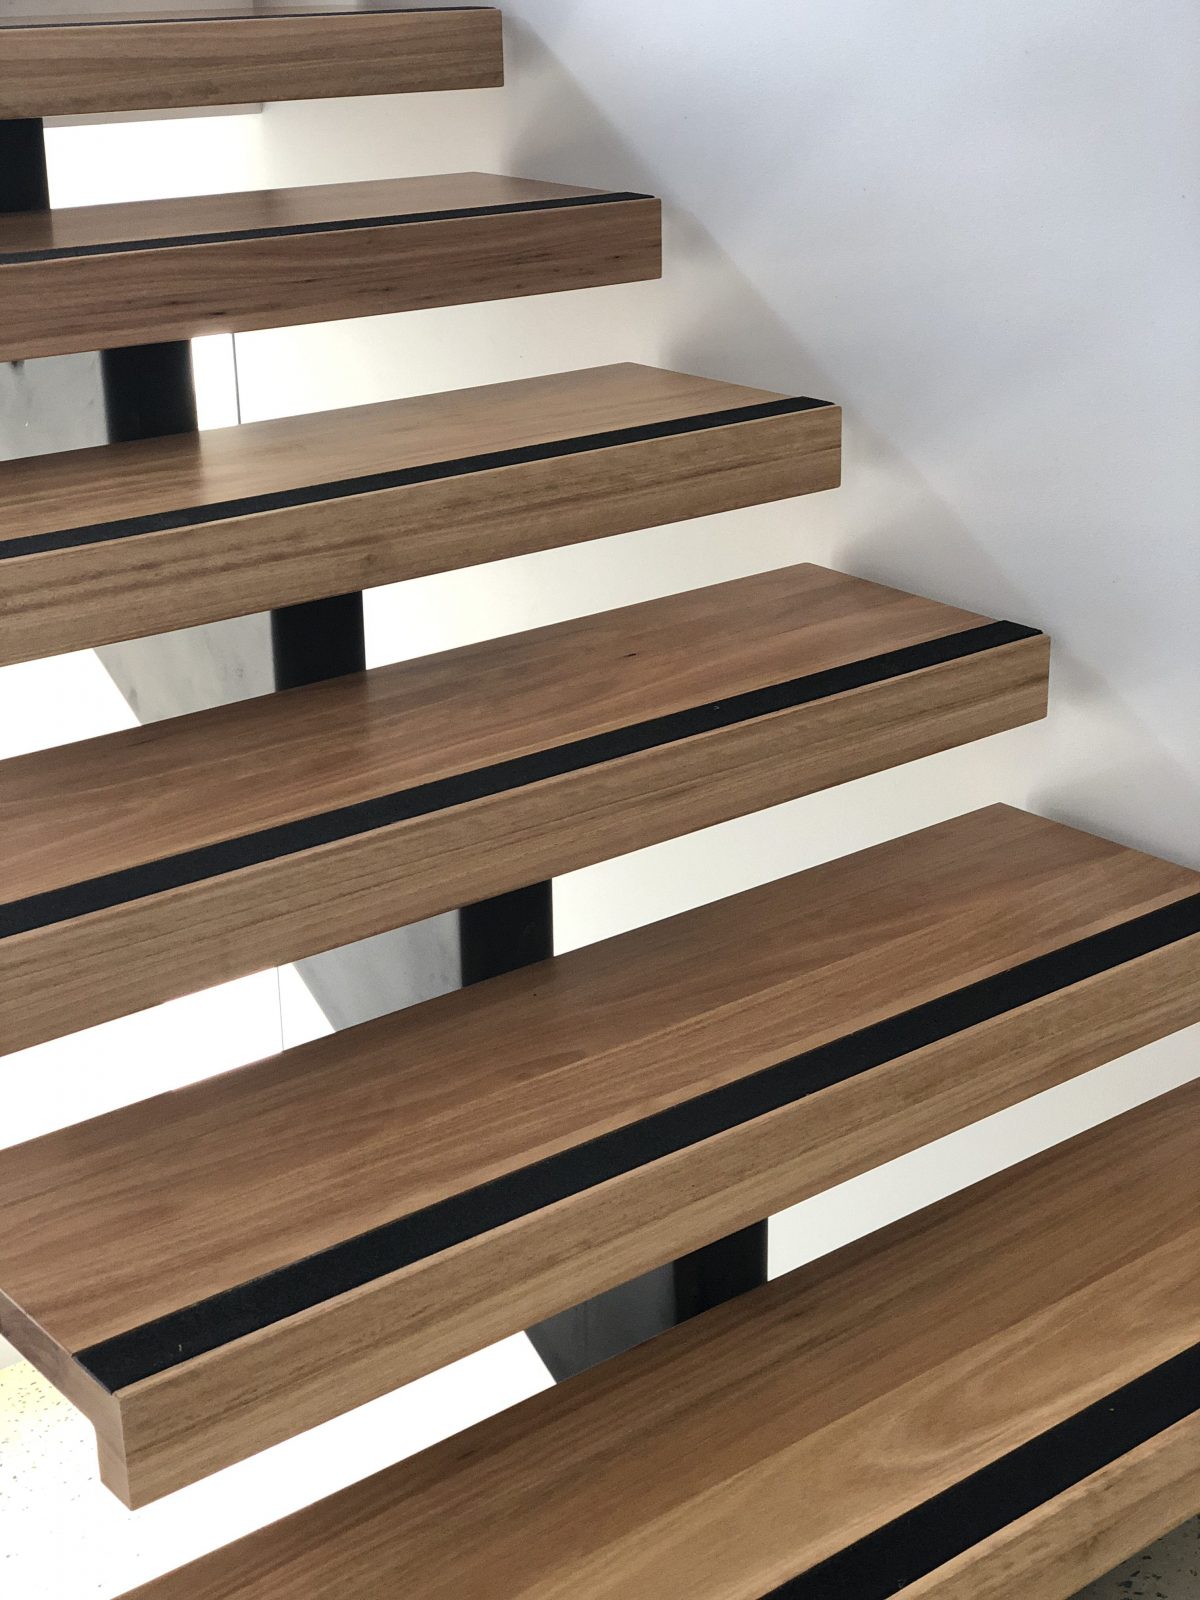 Unique design options through consultation with our Clients can provide some interesting staircase options to choose from by Timber Floors Pty Ltd